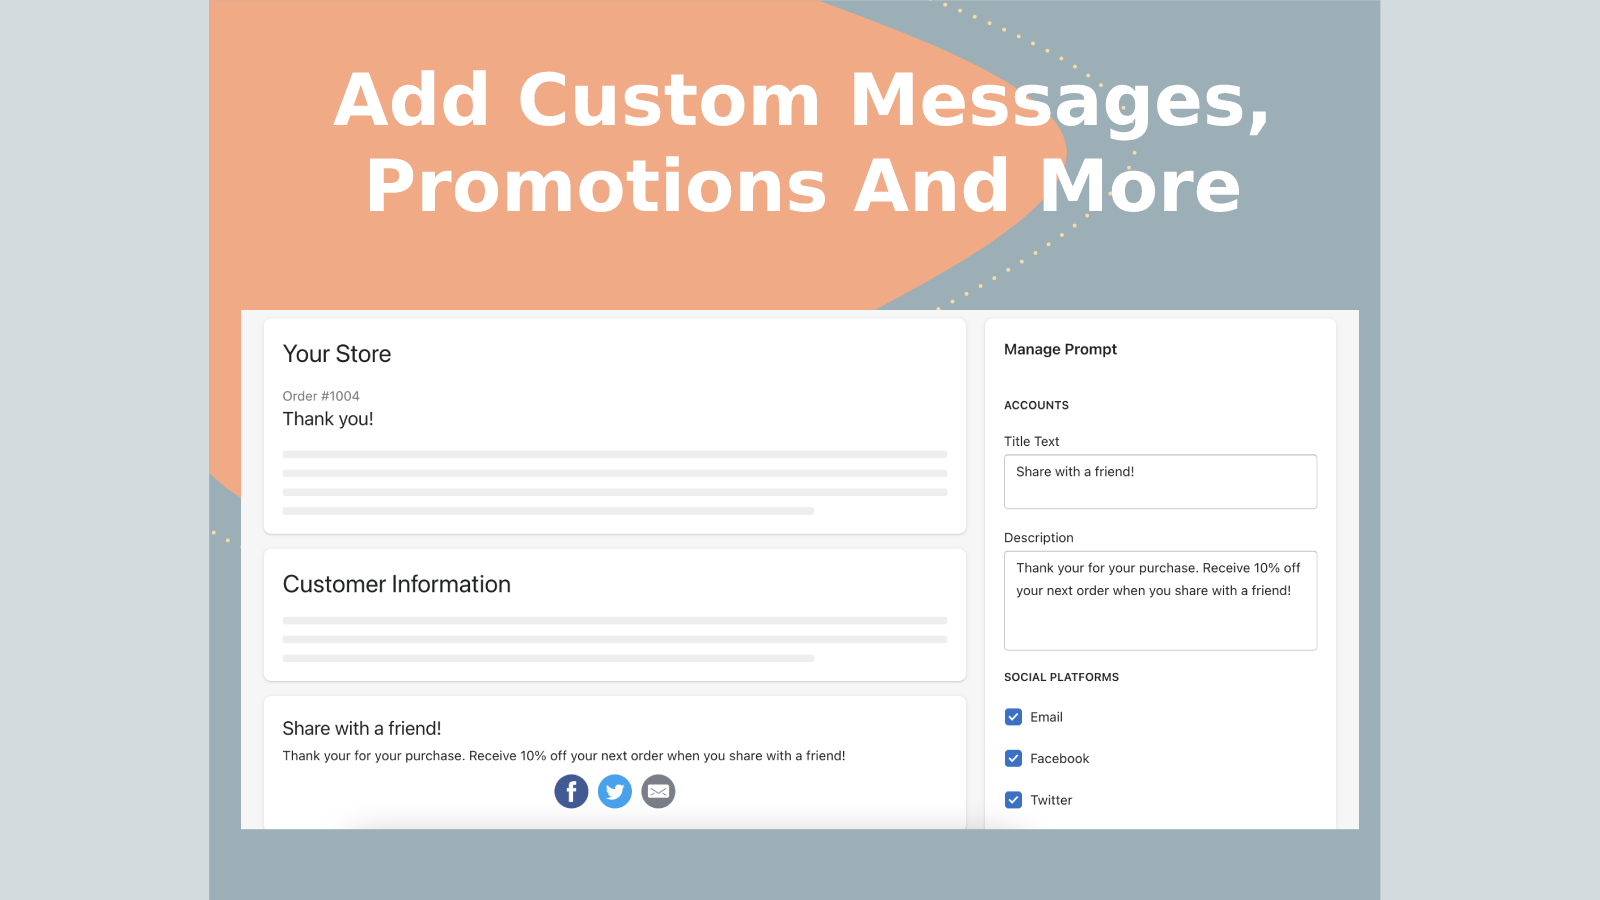 Customize your share buttons